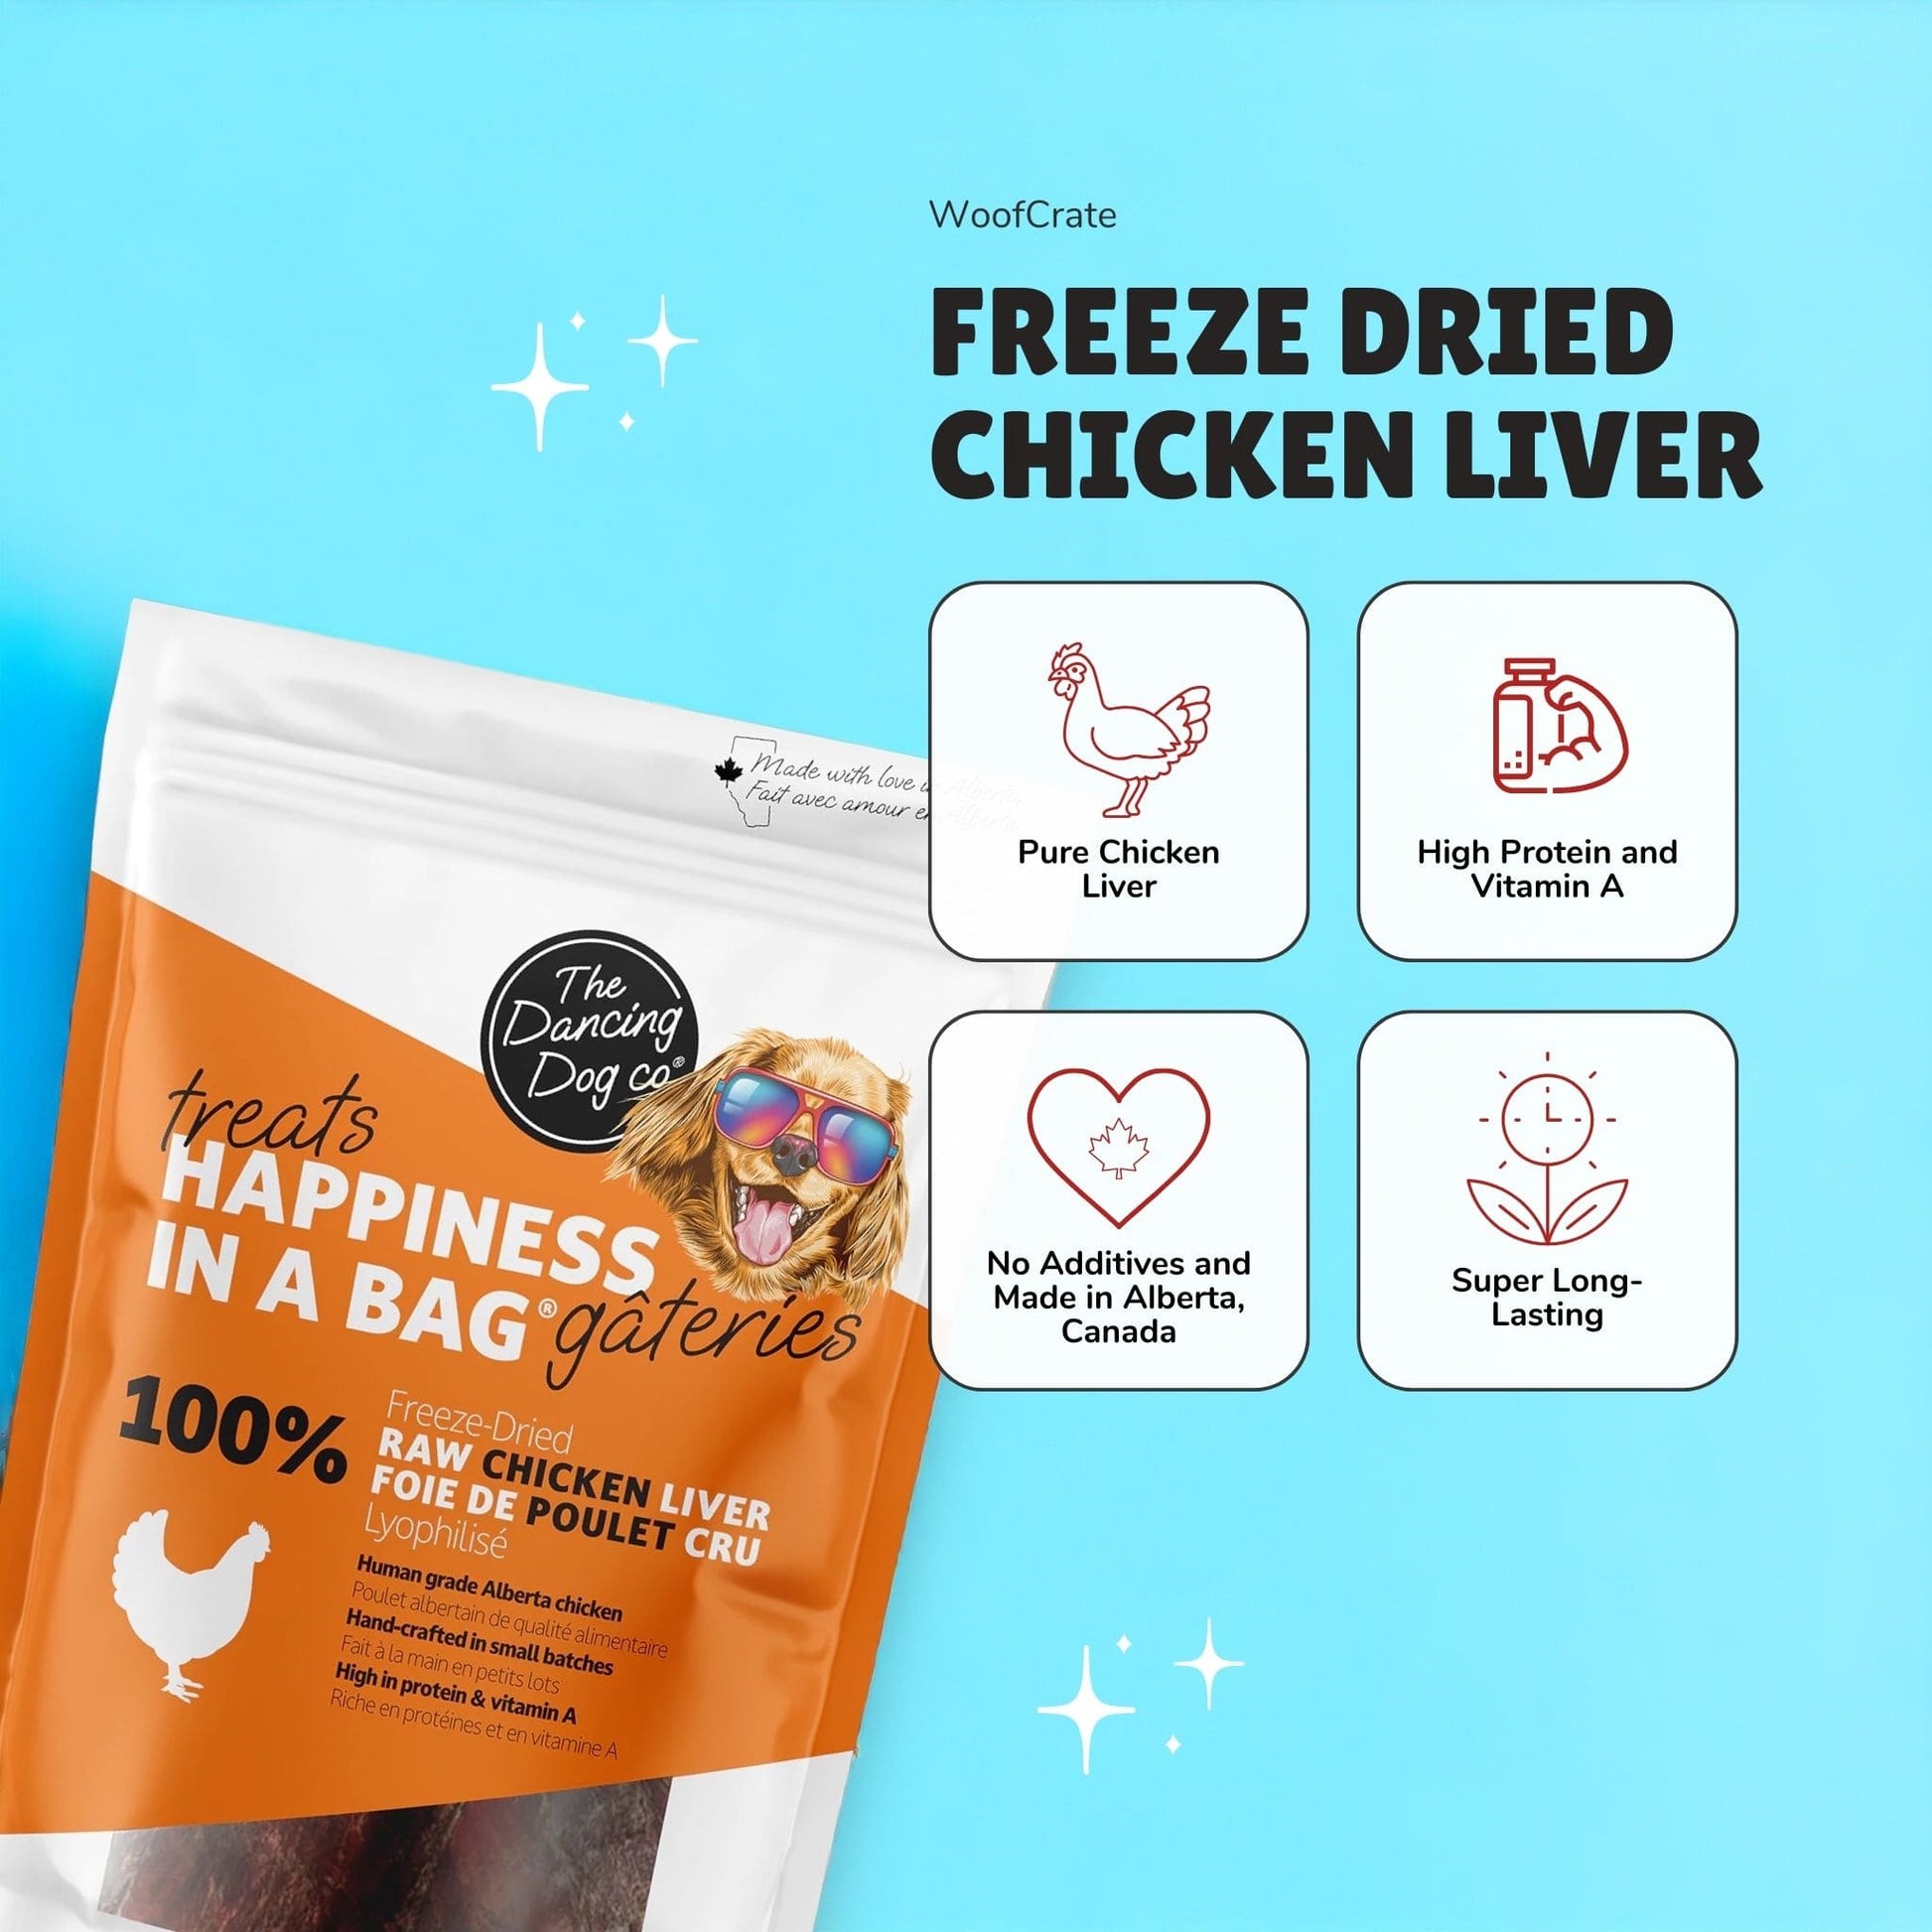 Benefits of freeze dried chicken liver treats for dogs side by side with a bag of chicken liver dog treats. The benefits include being high in omega and protein, having no additives, being made in Canada, and are long lasting.